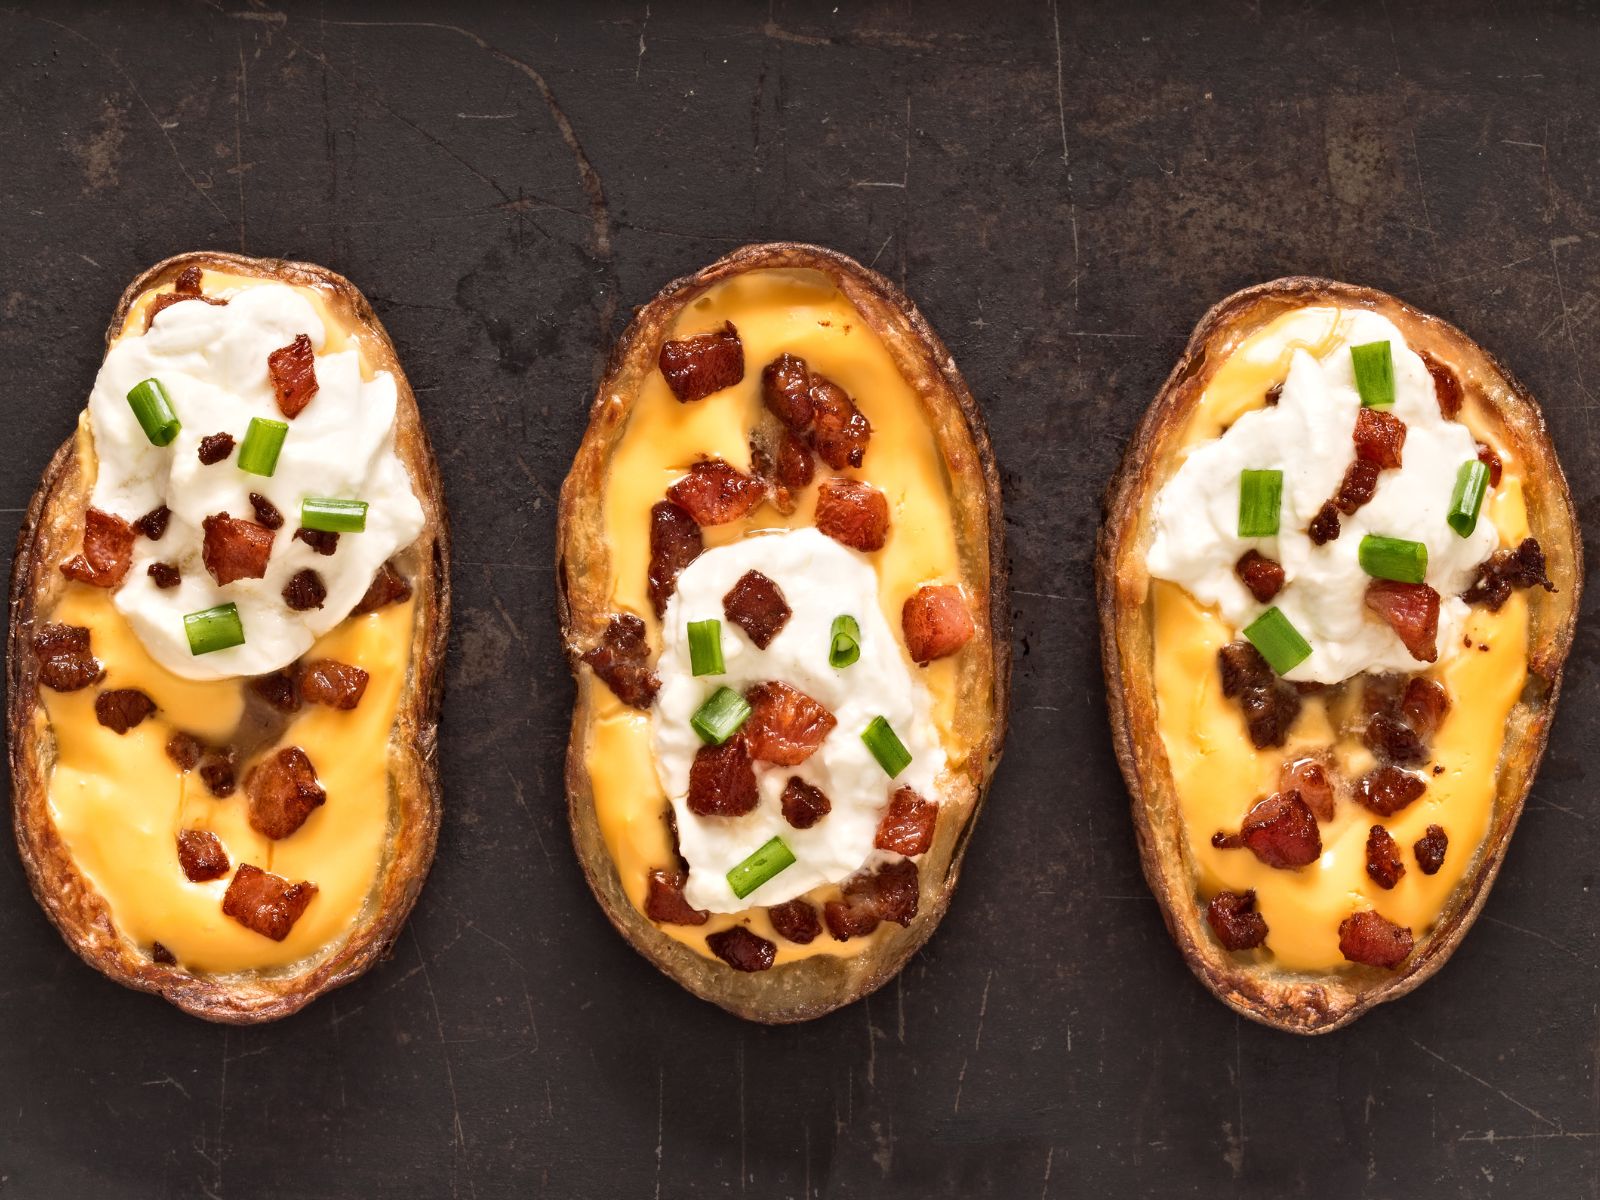 Game Day Potato Skins with cheese, bacon and sour cream